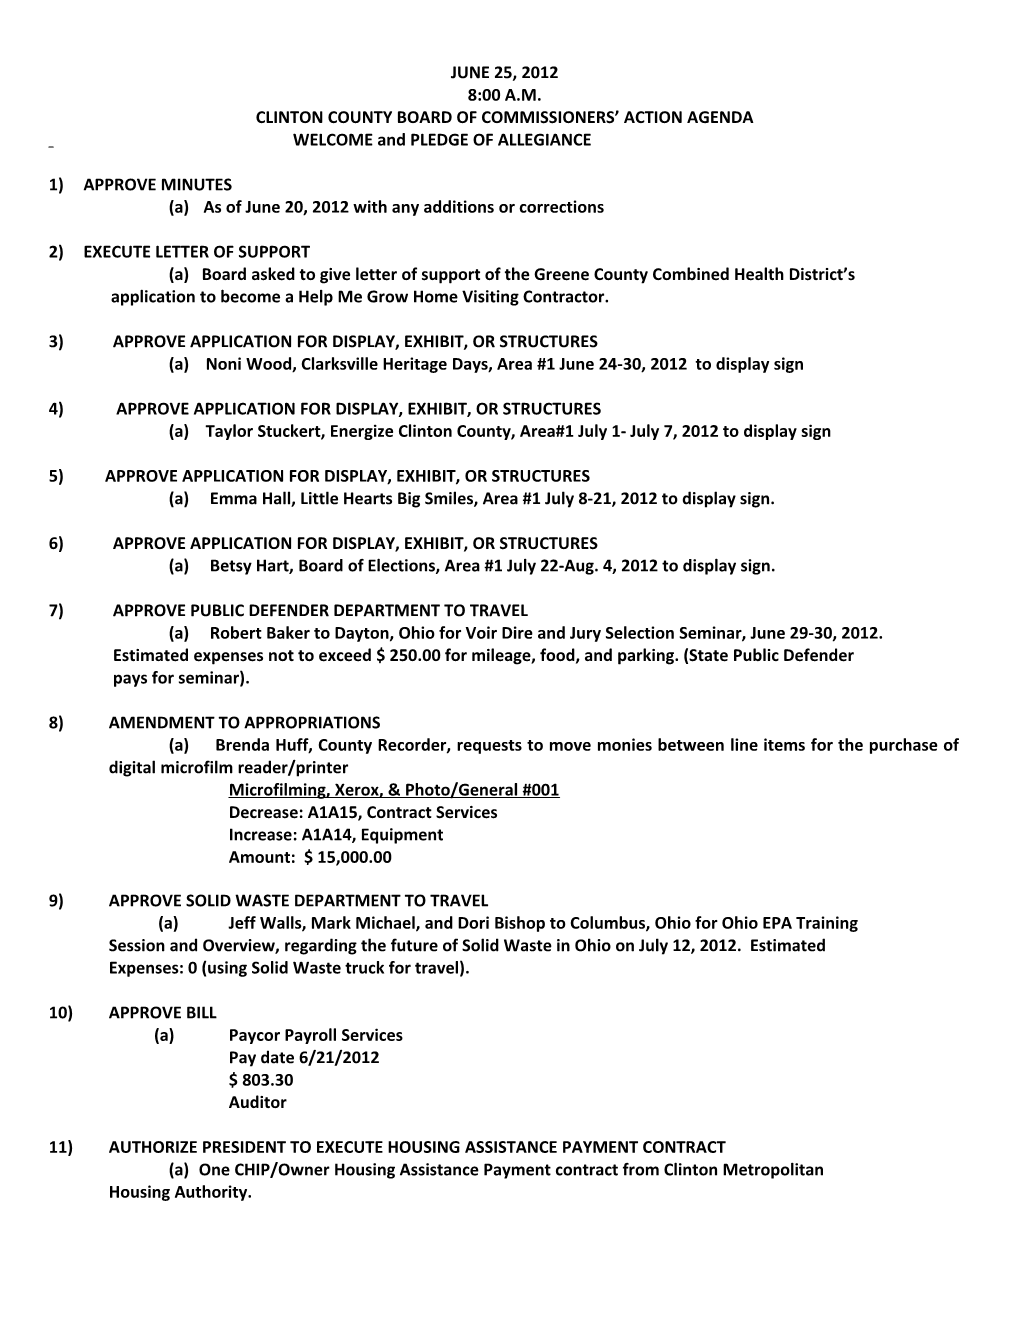 Clinton County Board of Commissioners Action Agenda